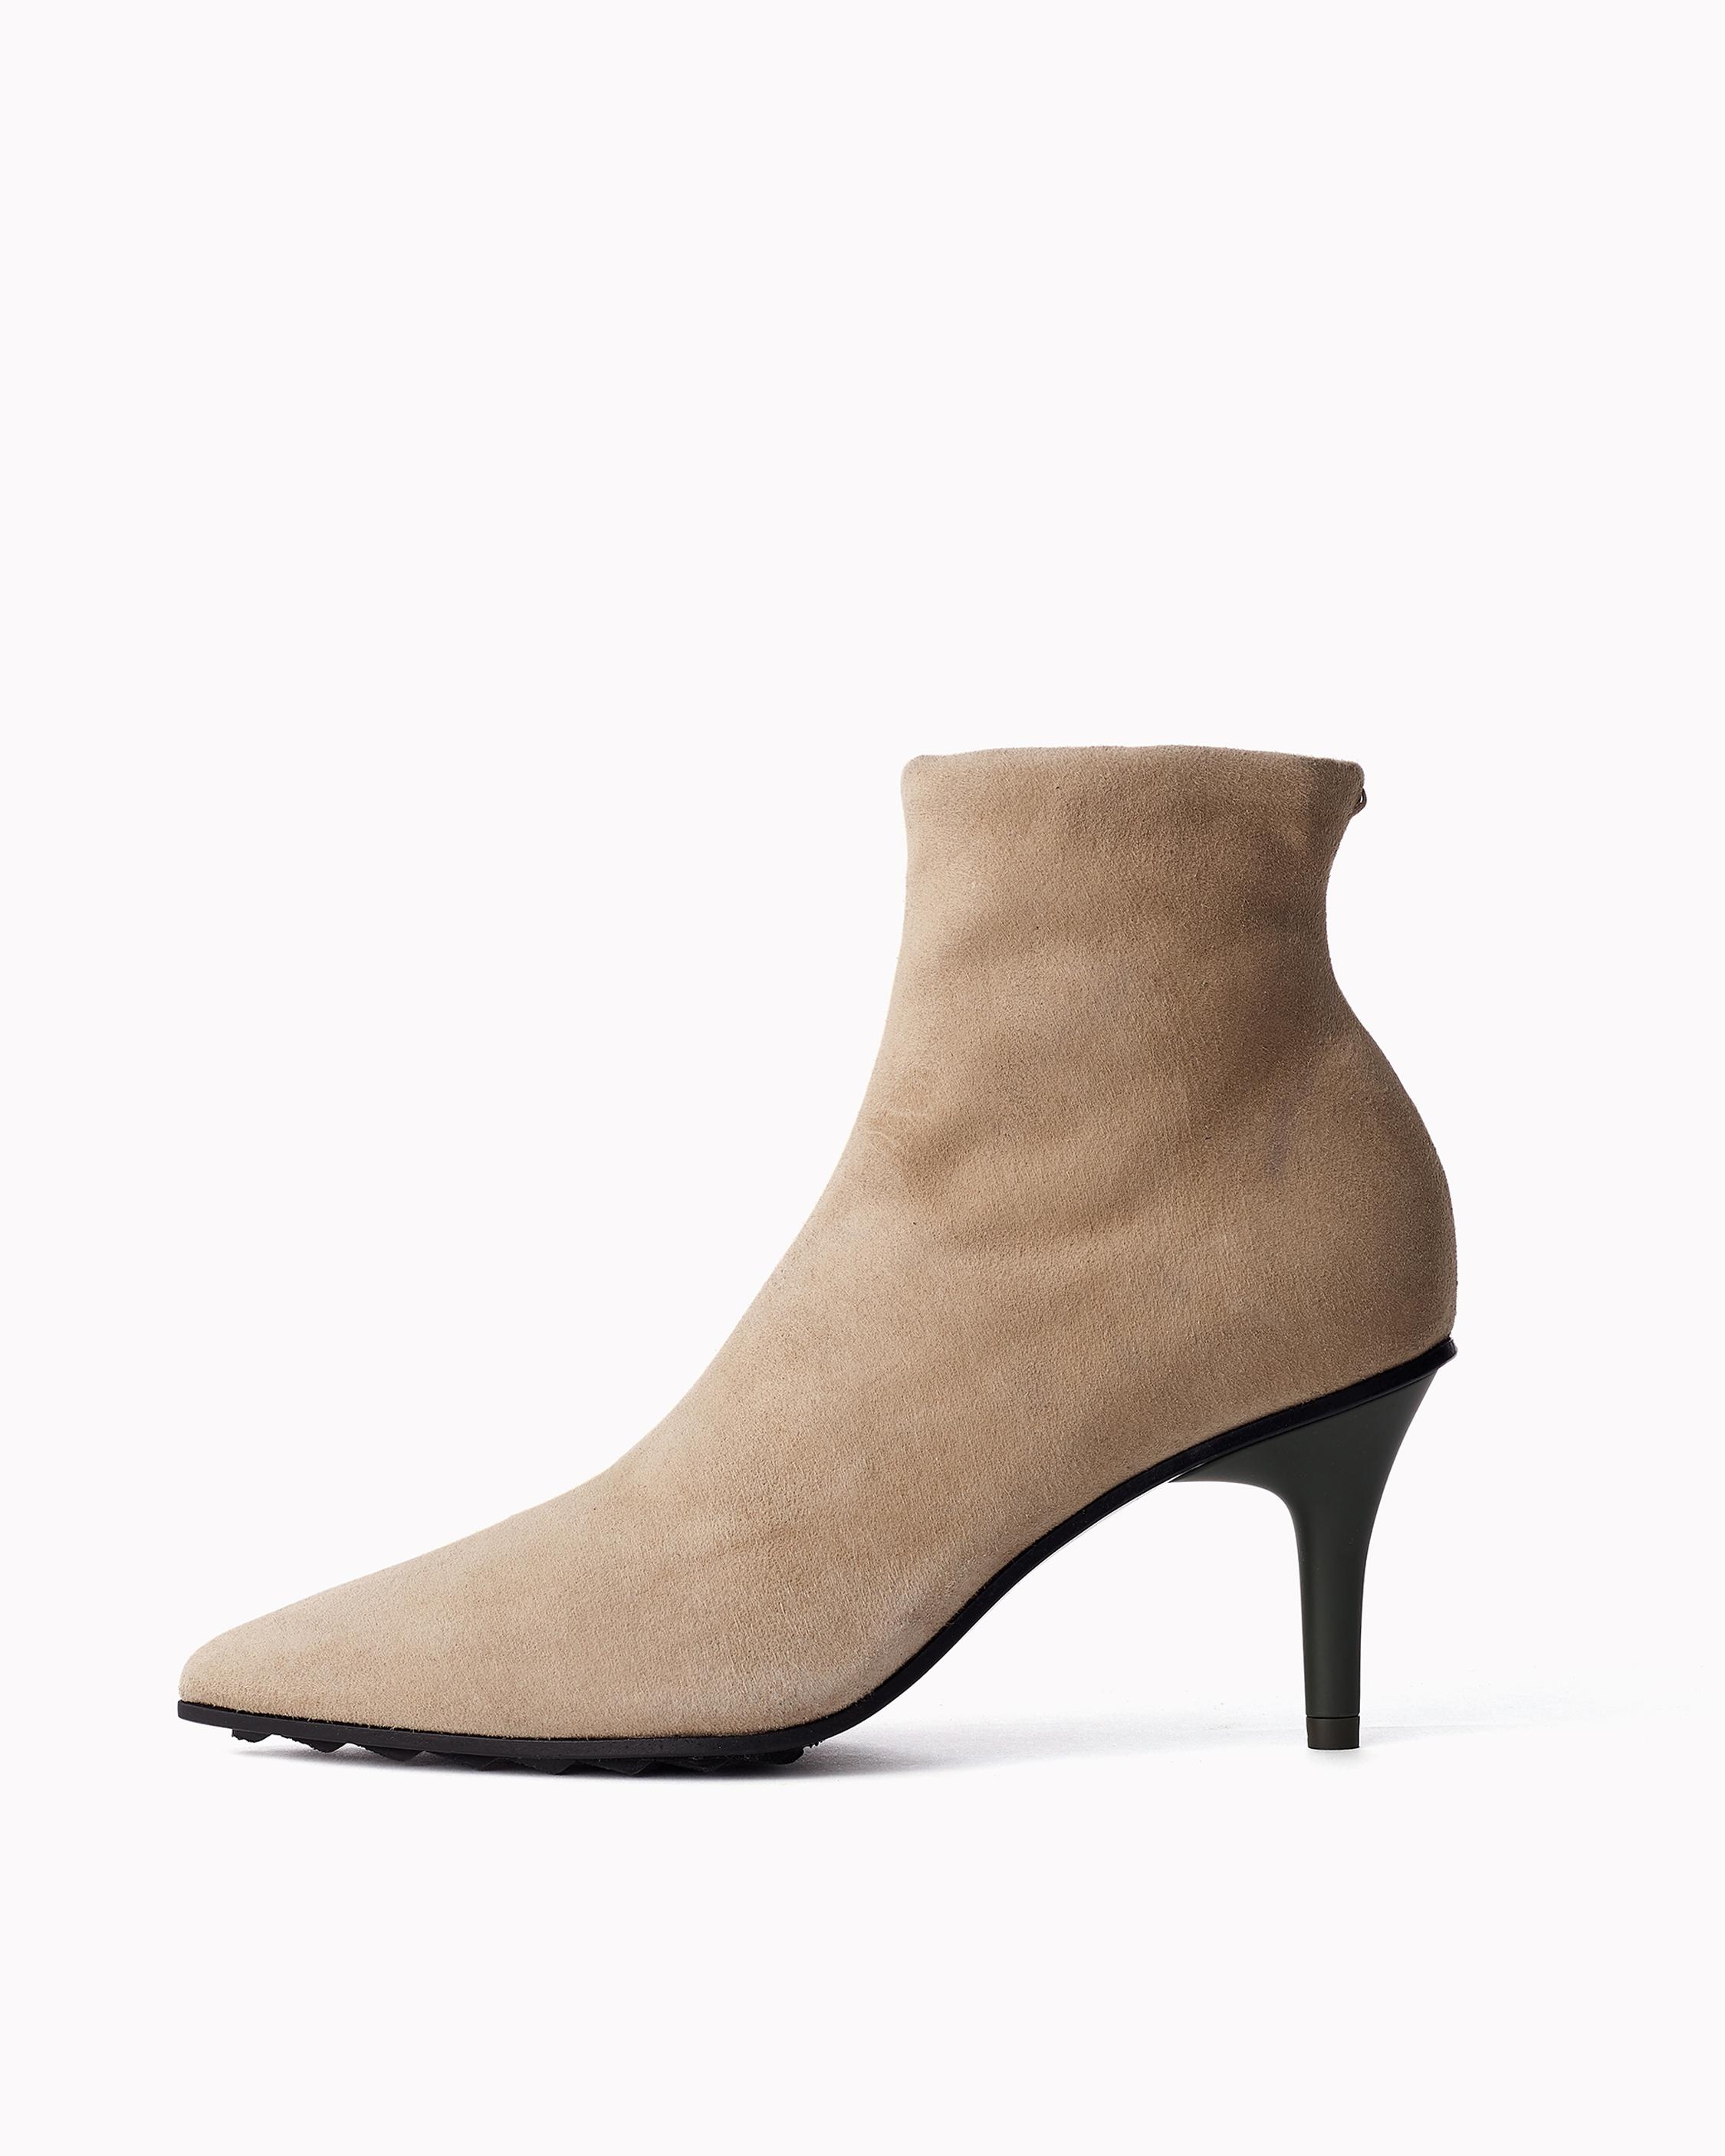 Beha Stretch Boot - Suede
Stiletto Ankle Boot - 1